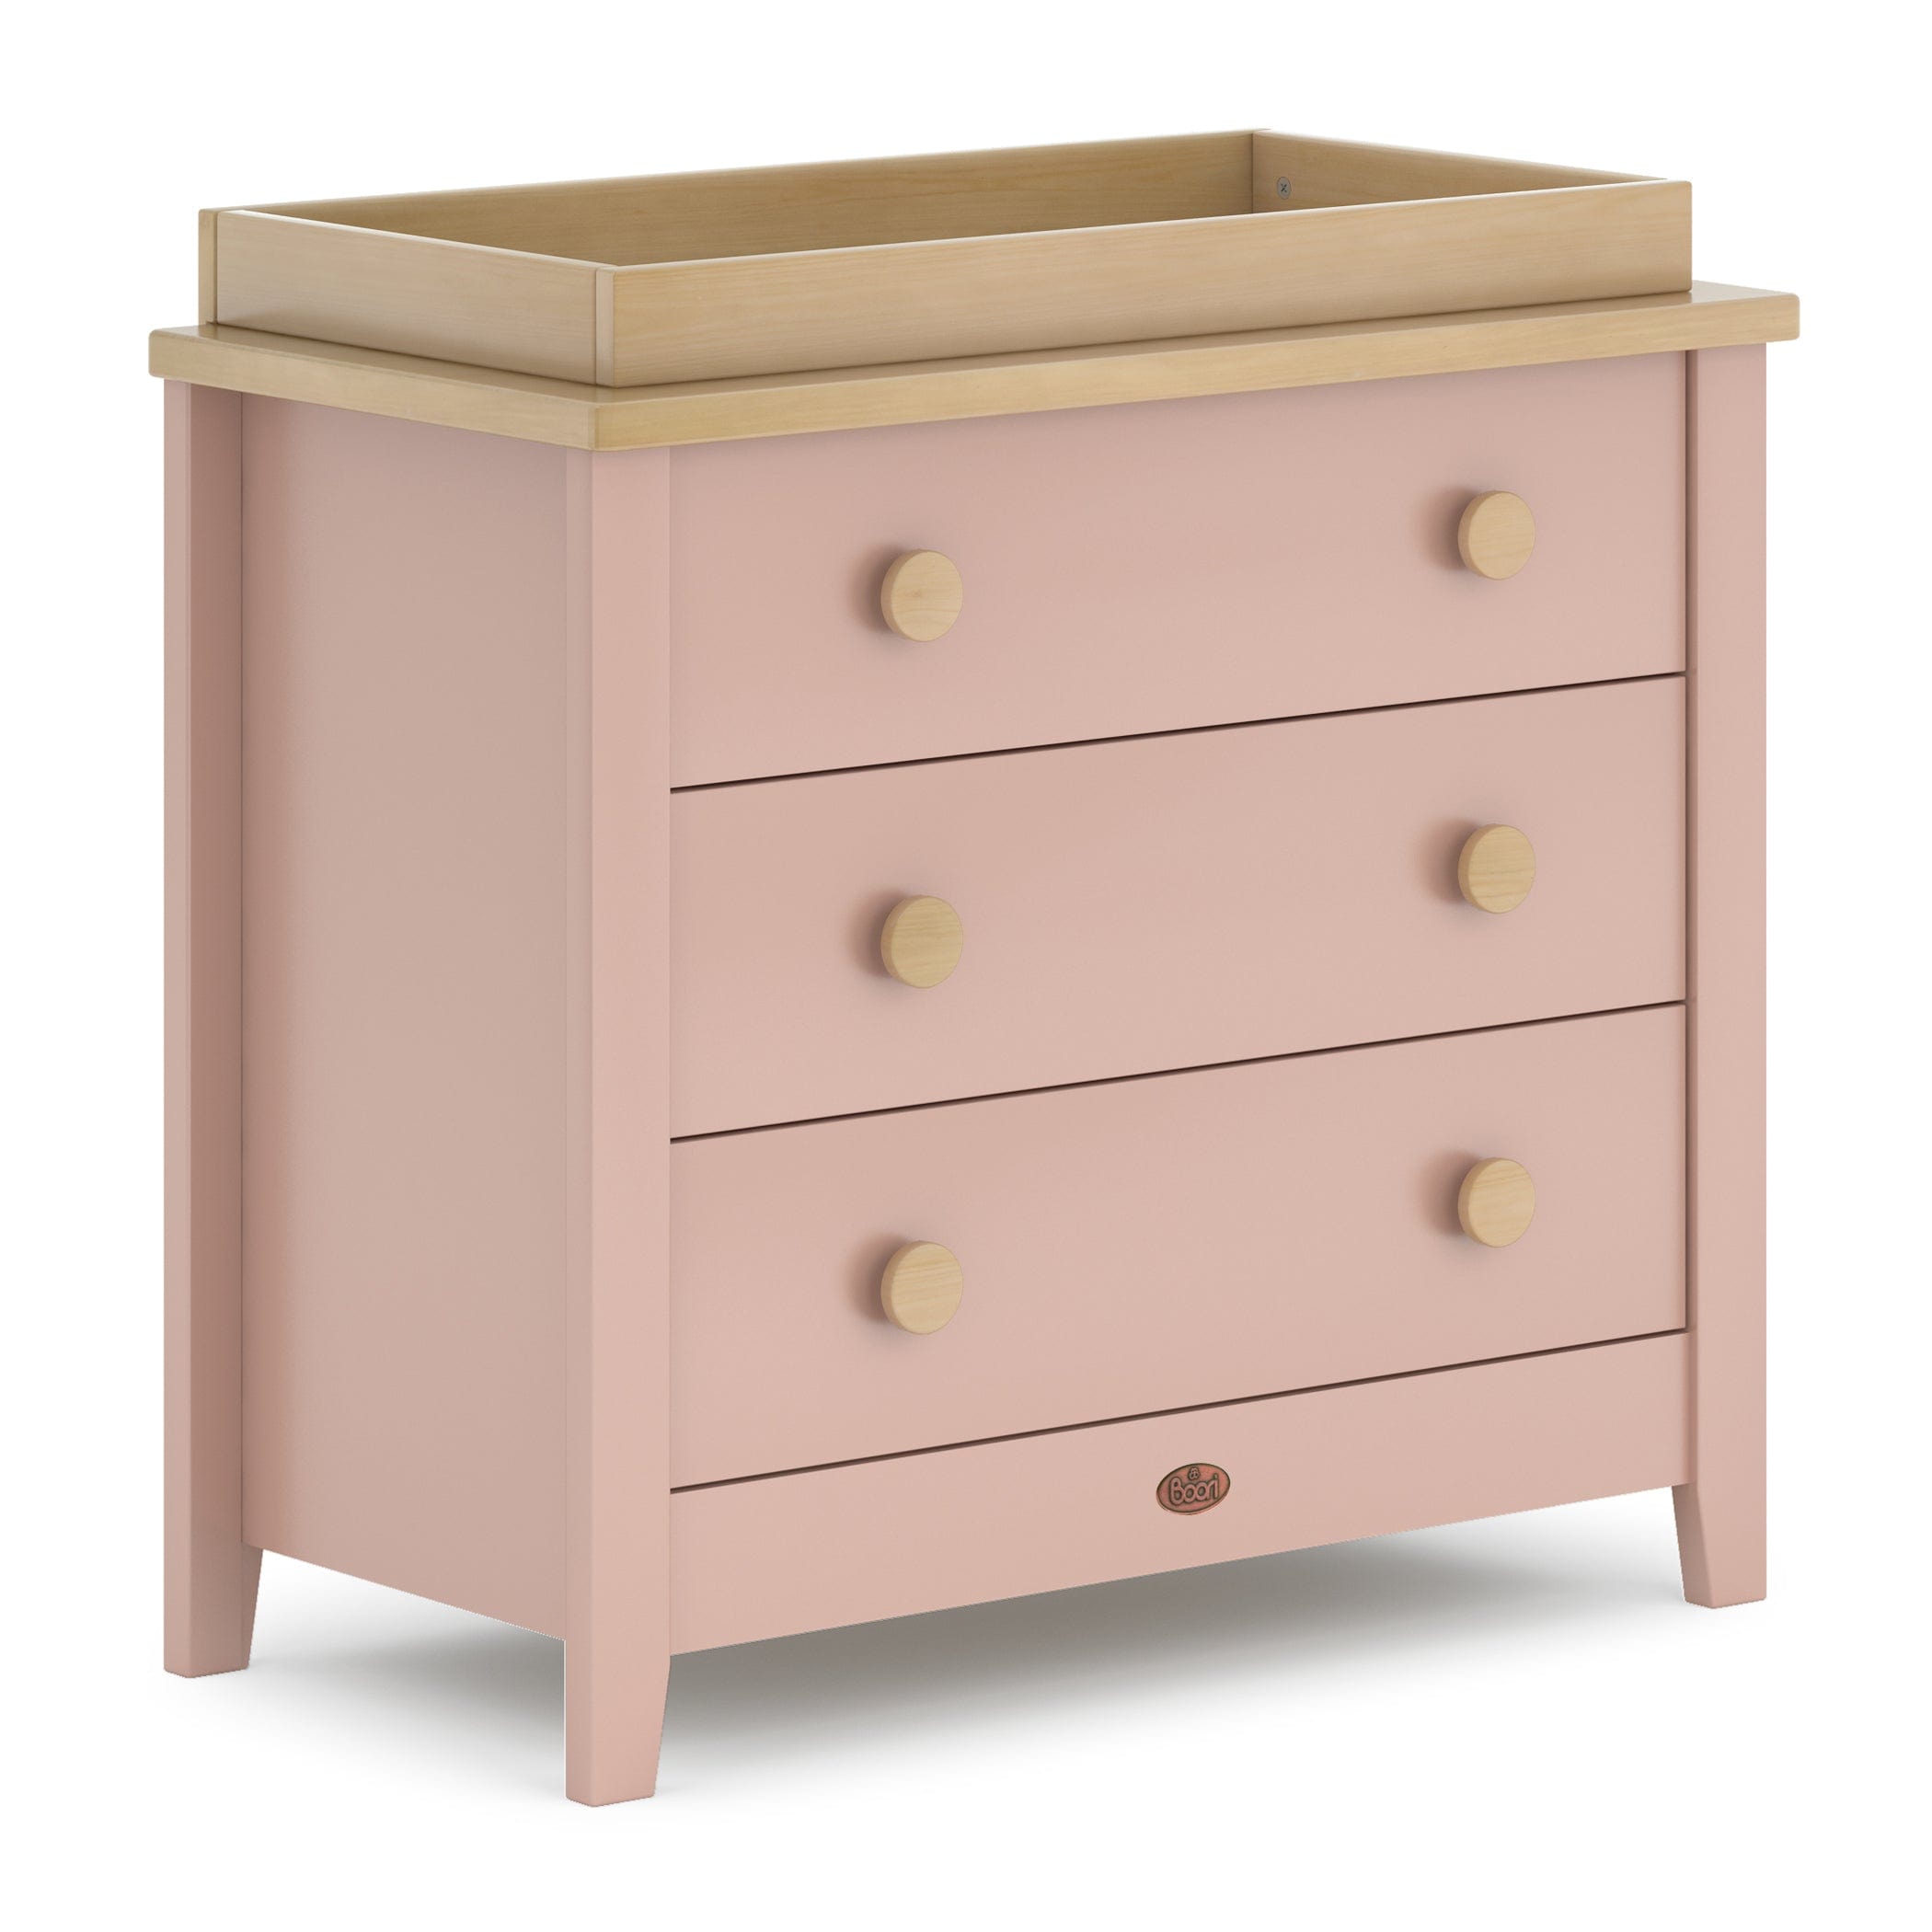 Boori 3 Drawer Chest Cherry & Almond Including Smart Assembly Chest Changing Tray Dressers & Changers B-3DCCHTV23-CHAD 9328730105774